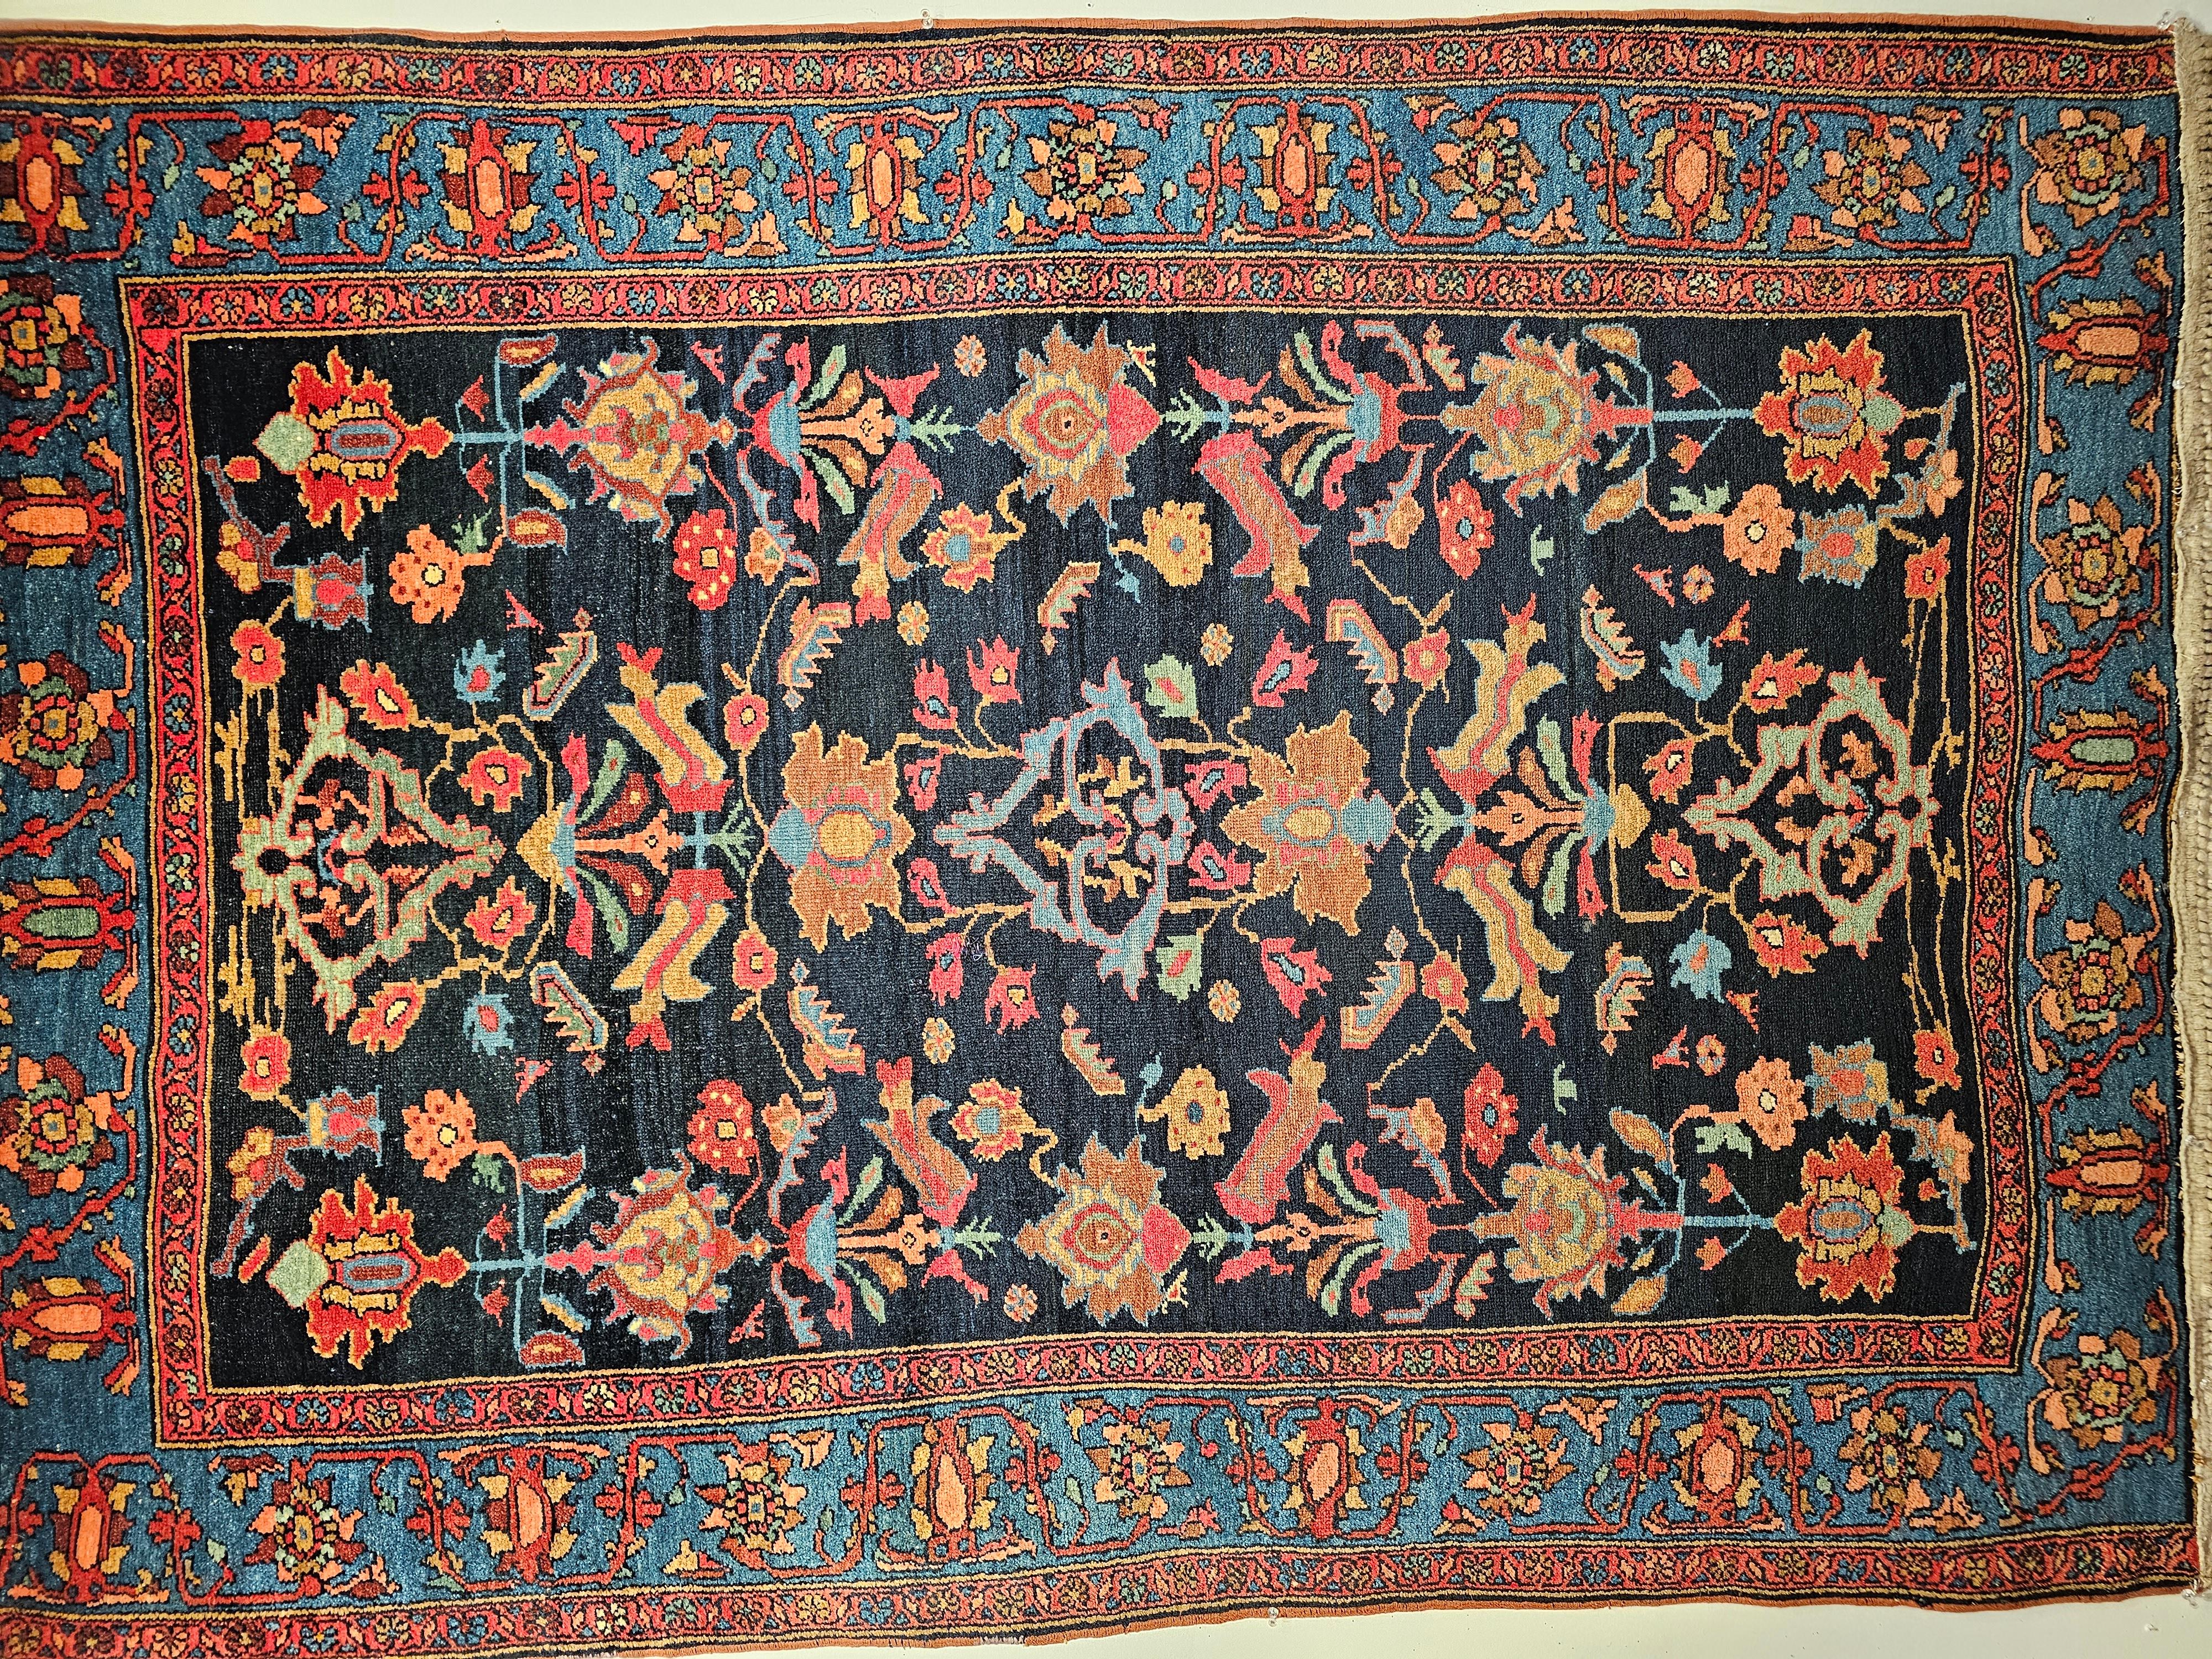 Vintage Persian Malayer area rug in an allover geometric pattern set on a midnight blue background with a French blue border and accents colors in pink, yellow, green, and red circa the early 1900s.    The larger format design elements in the field